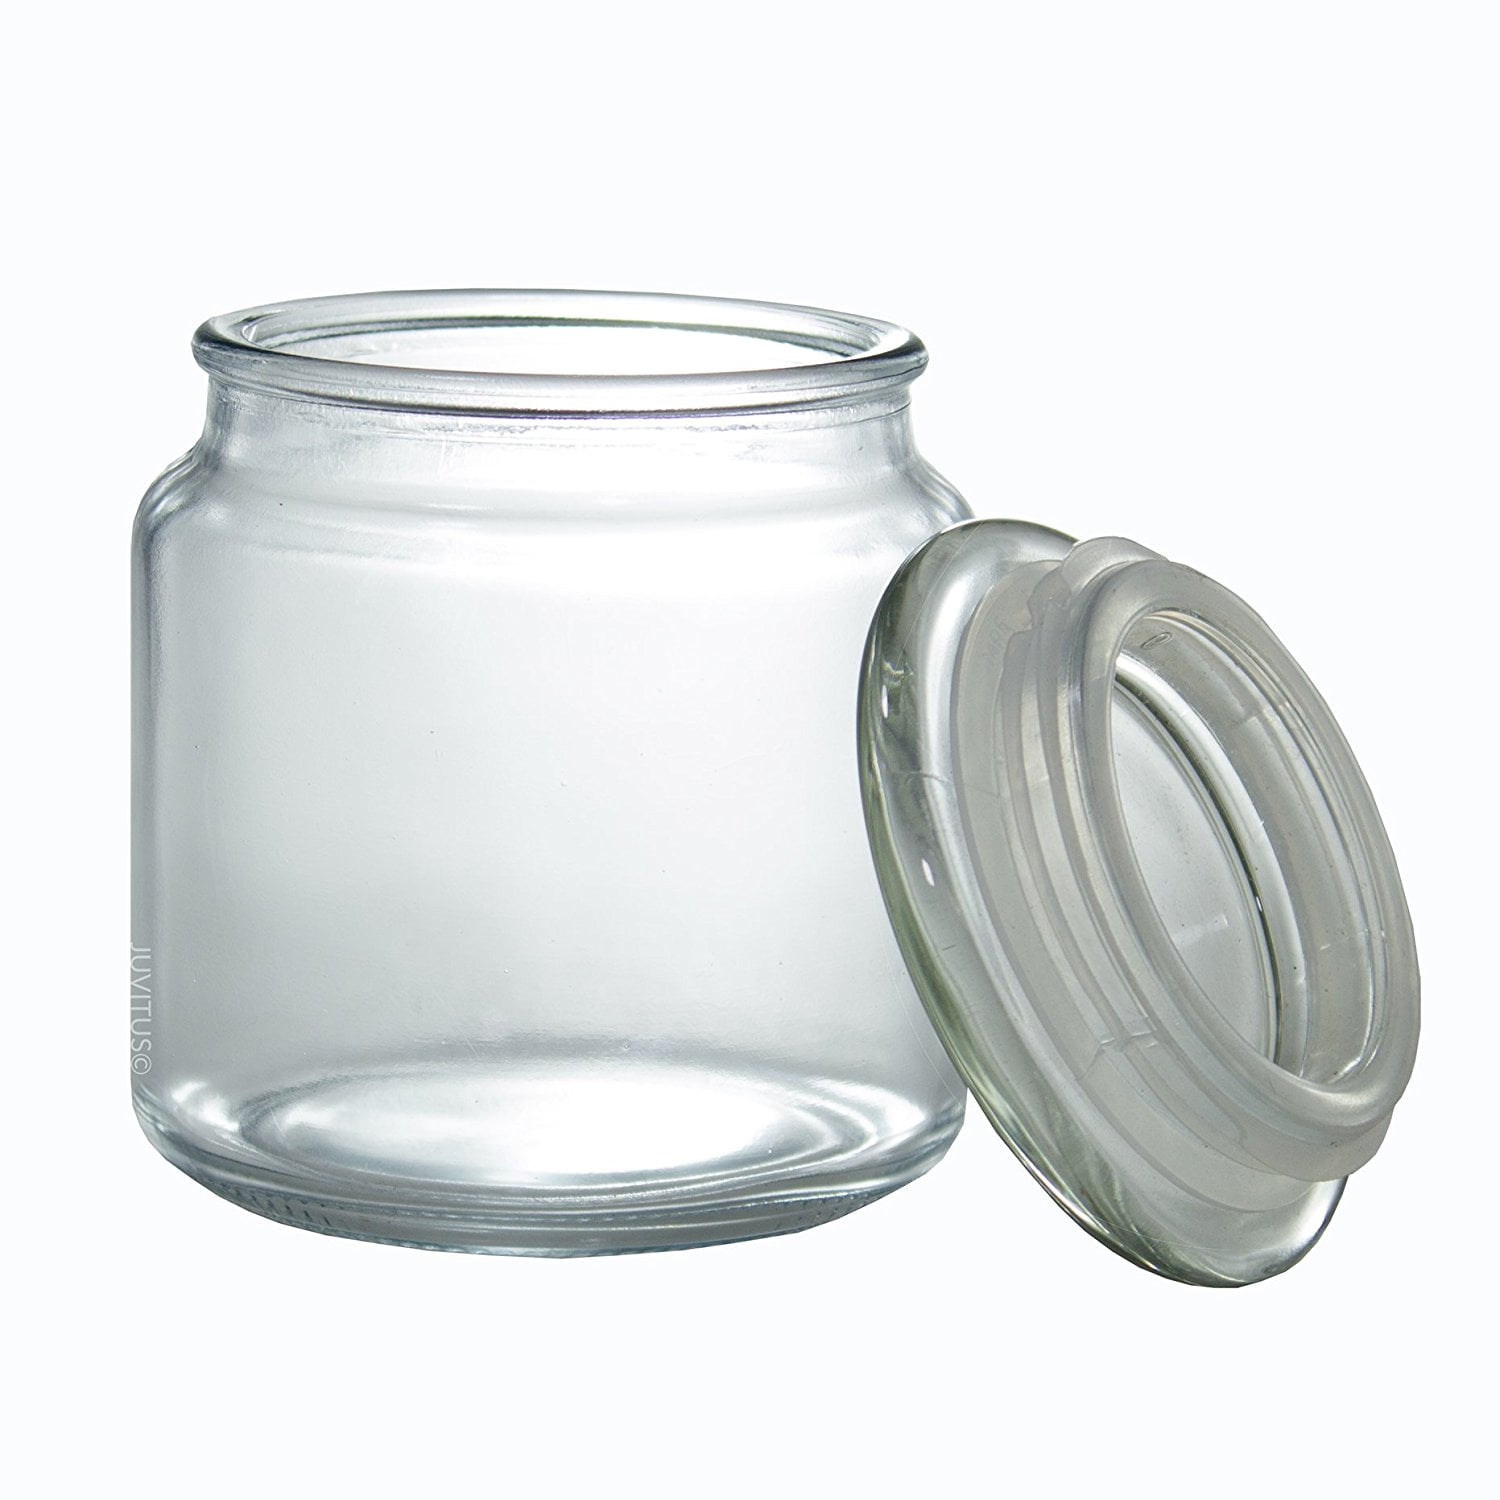 JUVITUS 16 oz Clear Glass Storage Jar with Wooden Bamboo Lid (4 Pack)